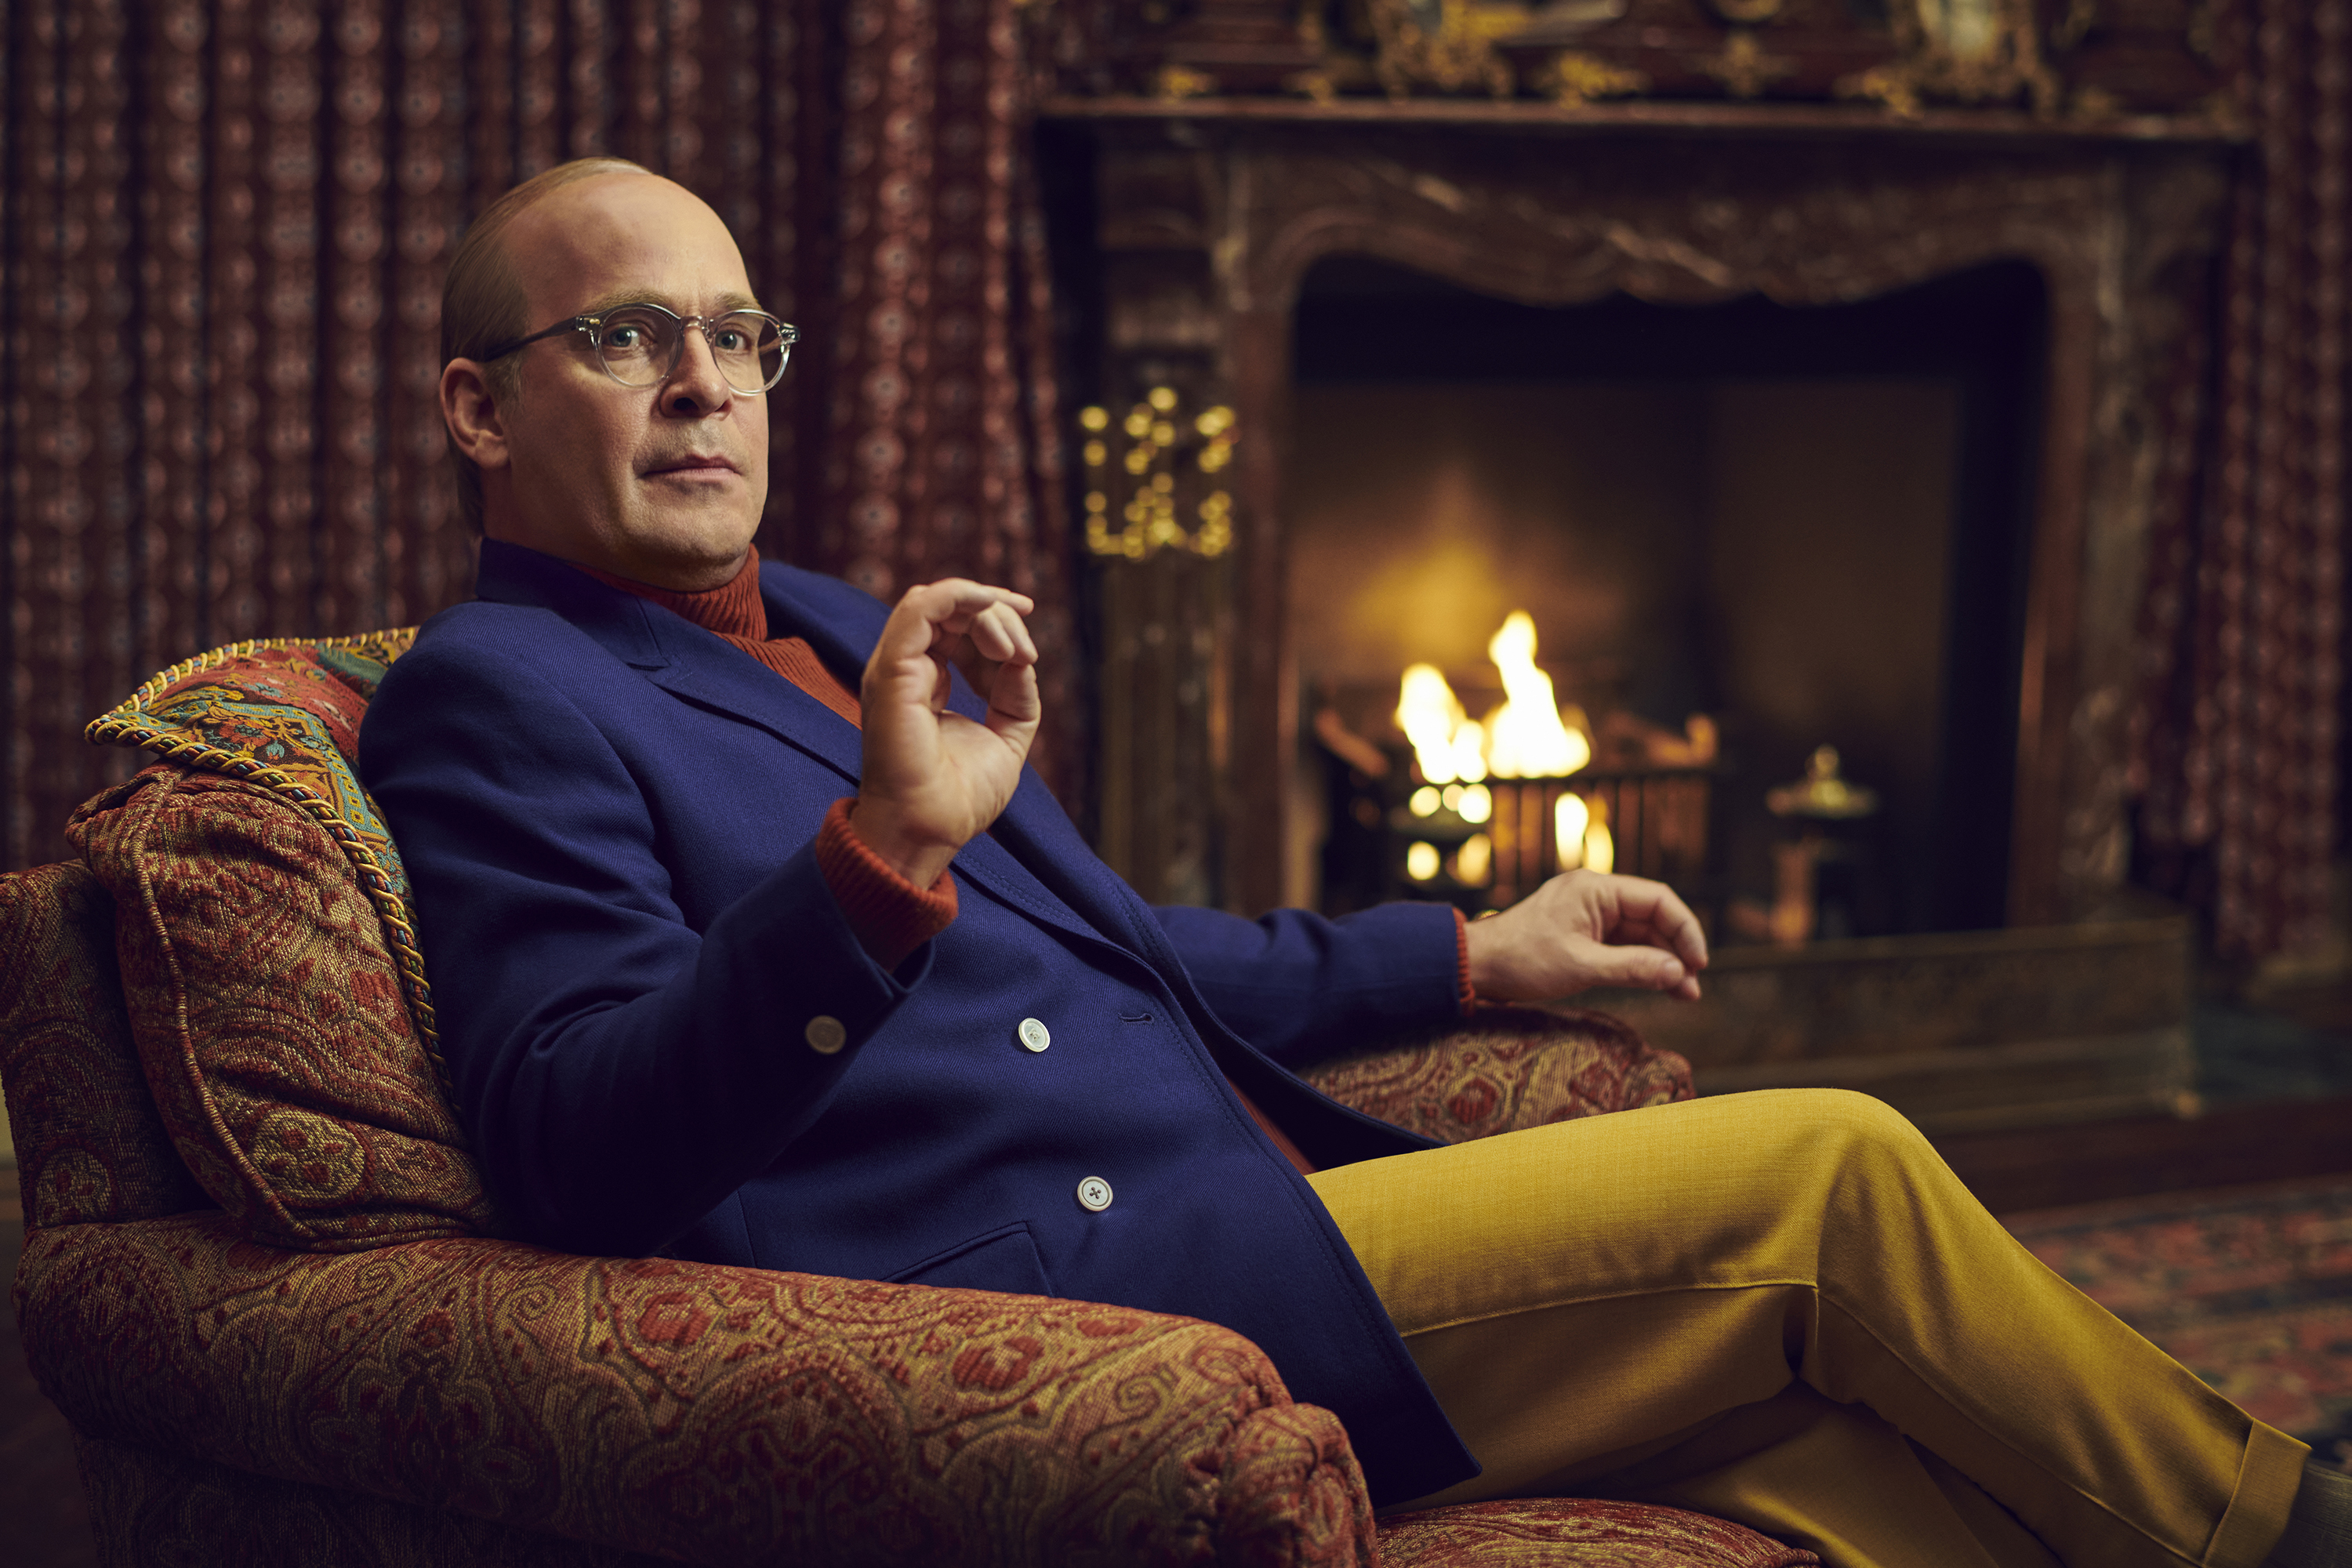 Tom Hollander as Truman Capote in a lounge chair, mustard slacks and a blue jacket from FX’s Feud: Capote vs. The Swans